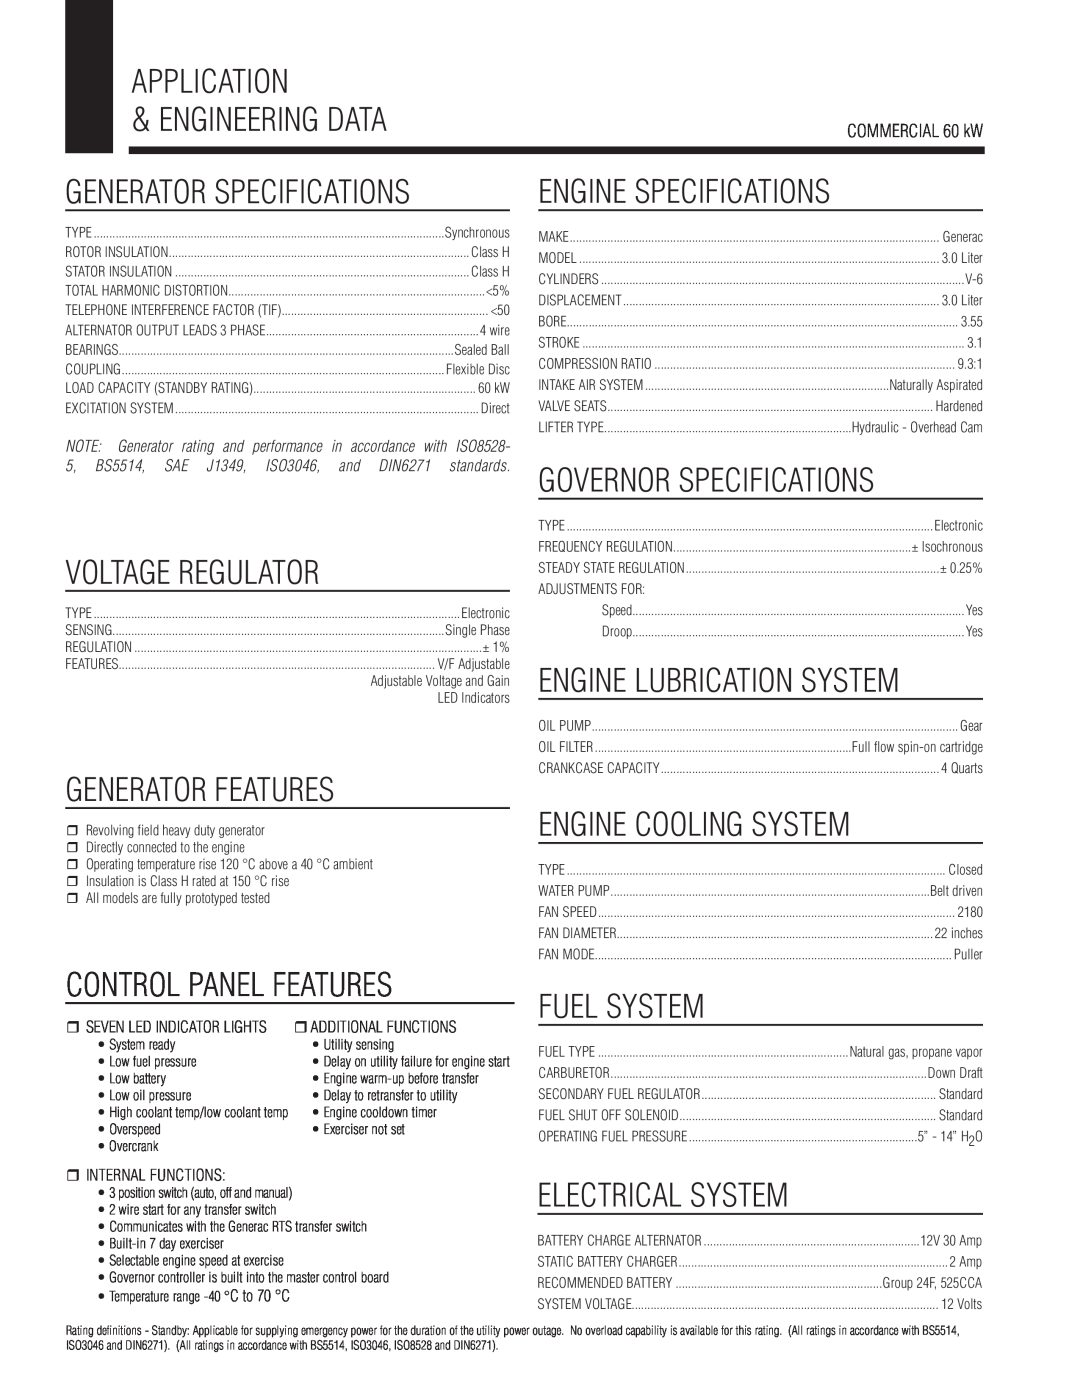 Generac Power Systems COMMERCIAL SERIES manual Application & Engineering Data 